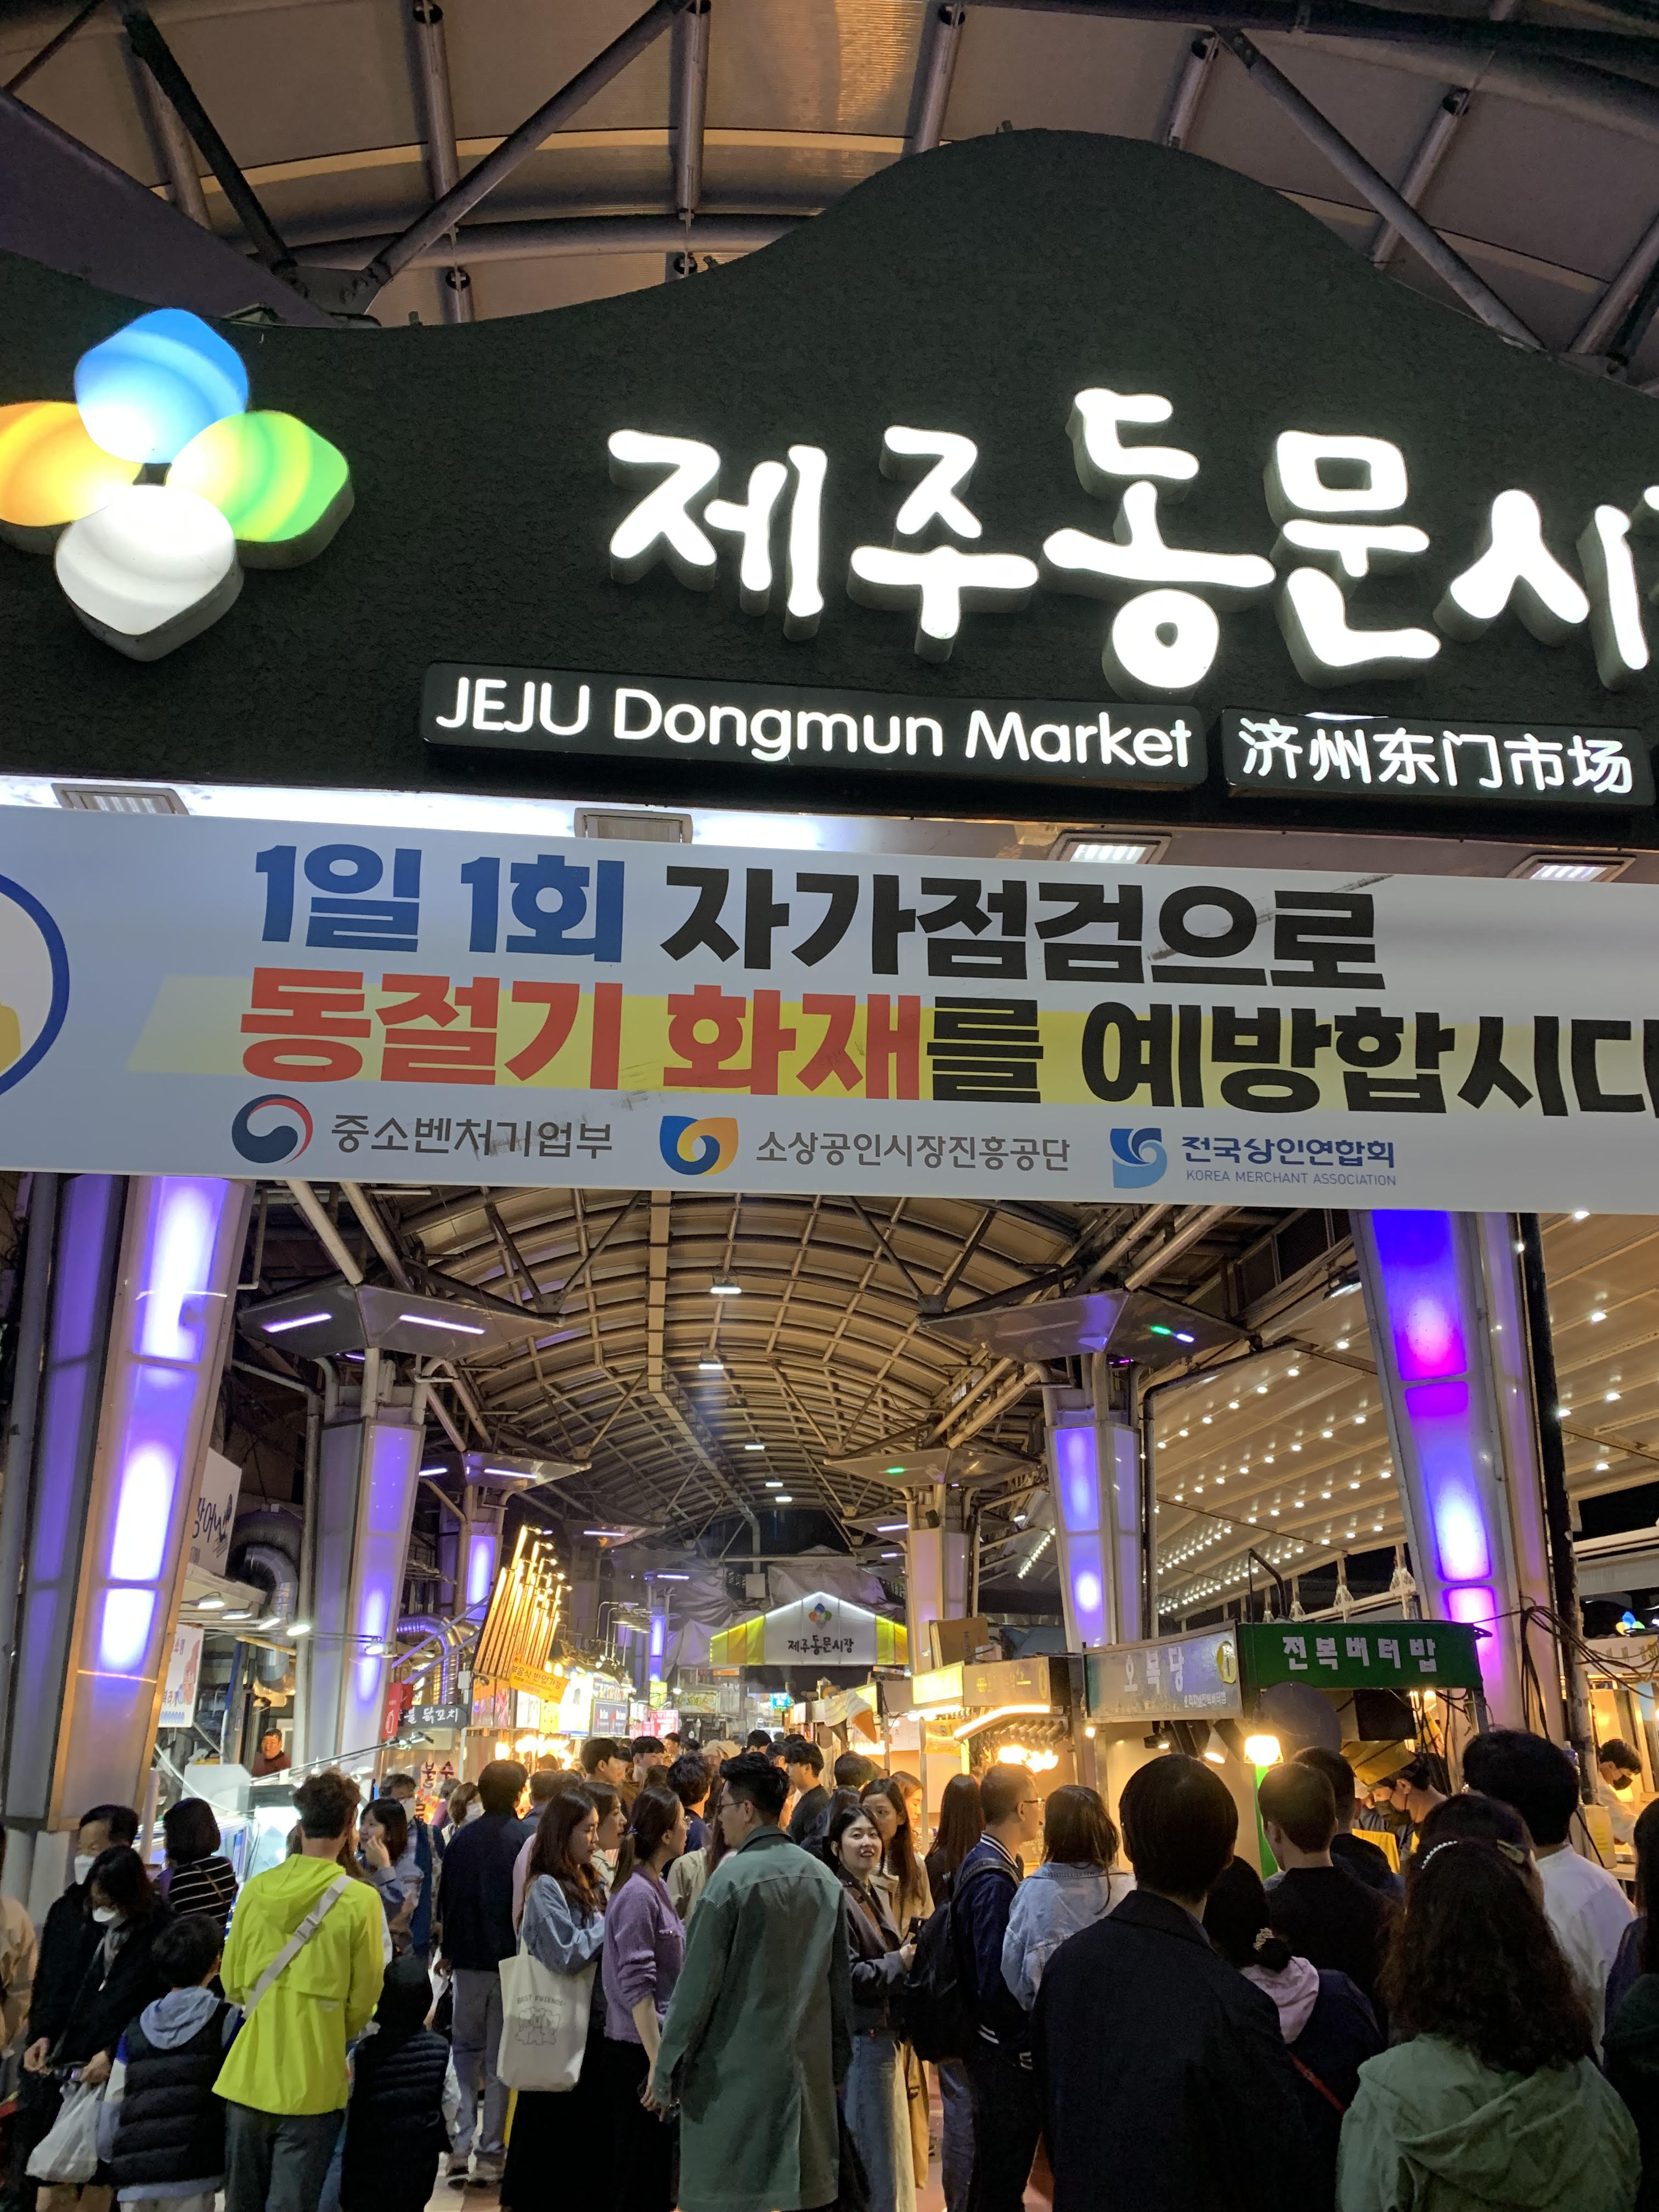 The sign at the entrance of Jeju Dongmun Market. 